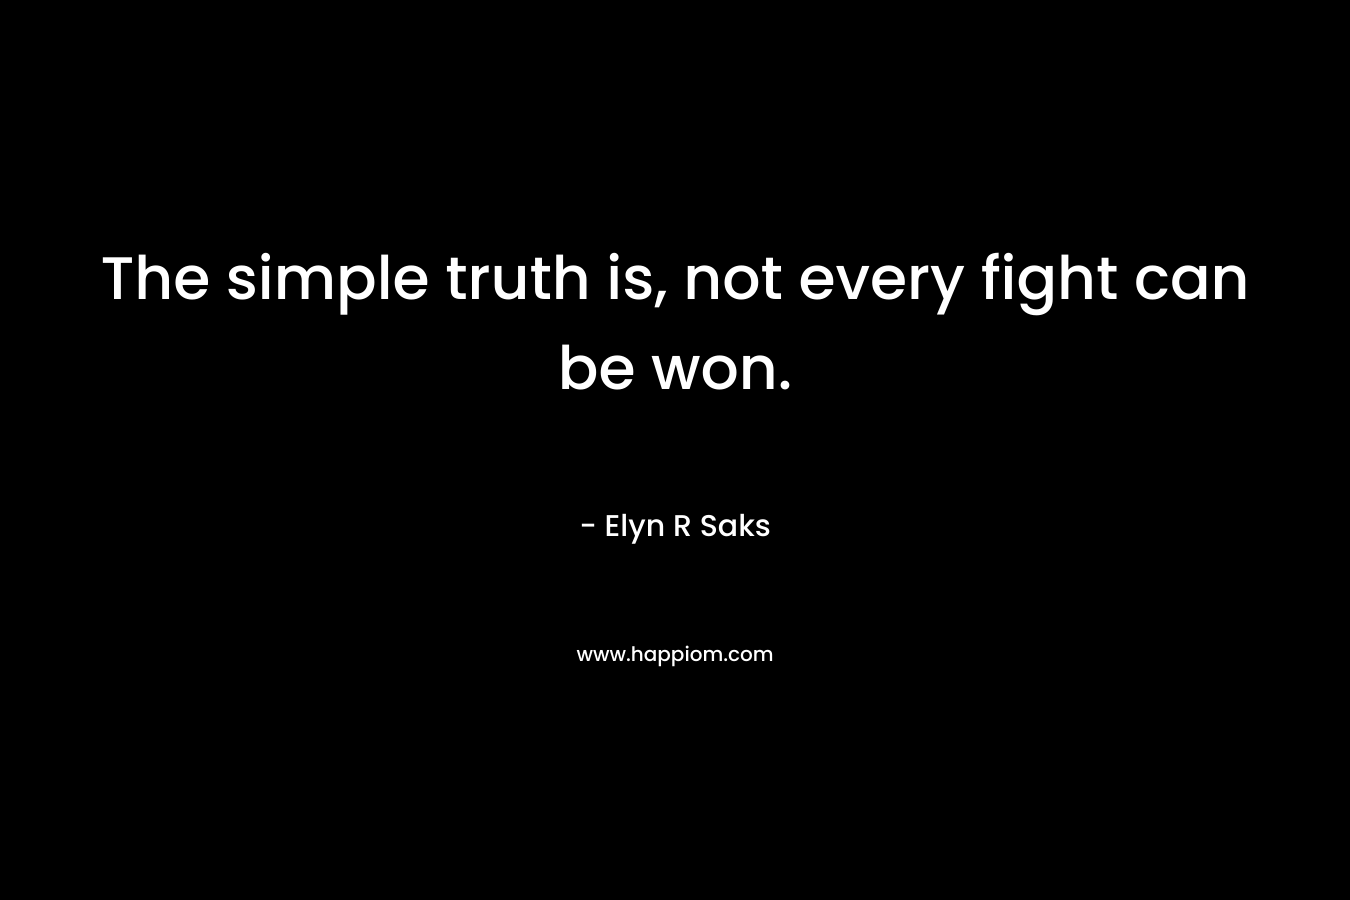 The simple truth is, not every fight can be won.